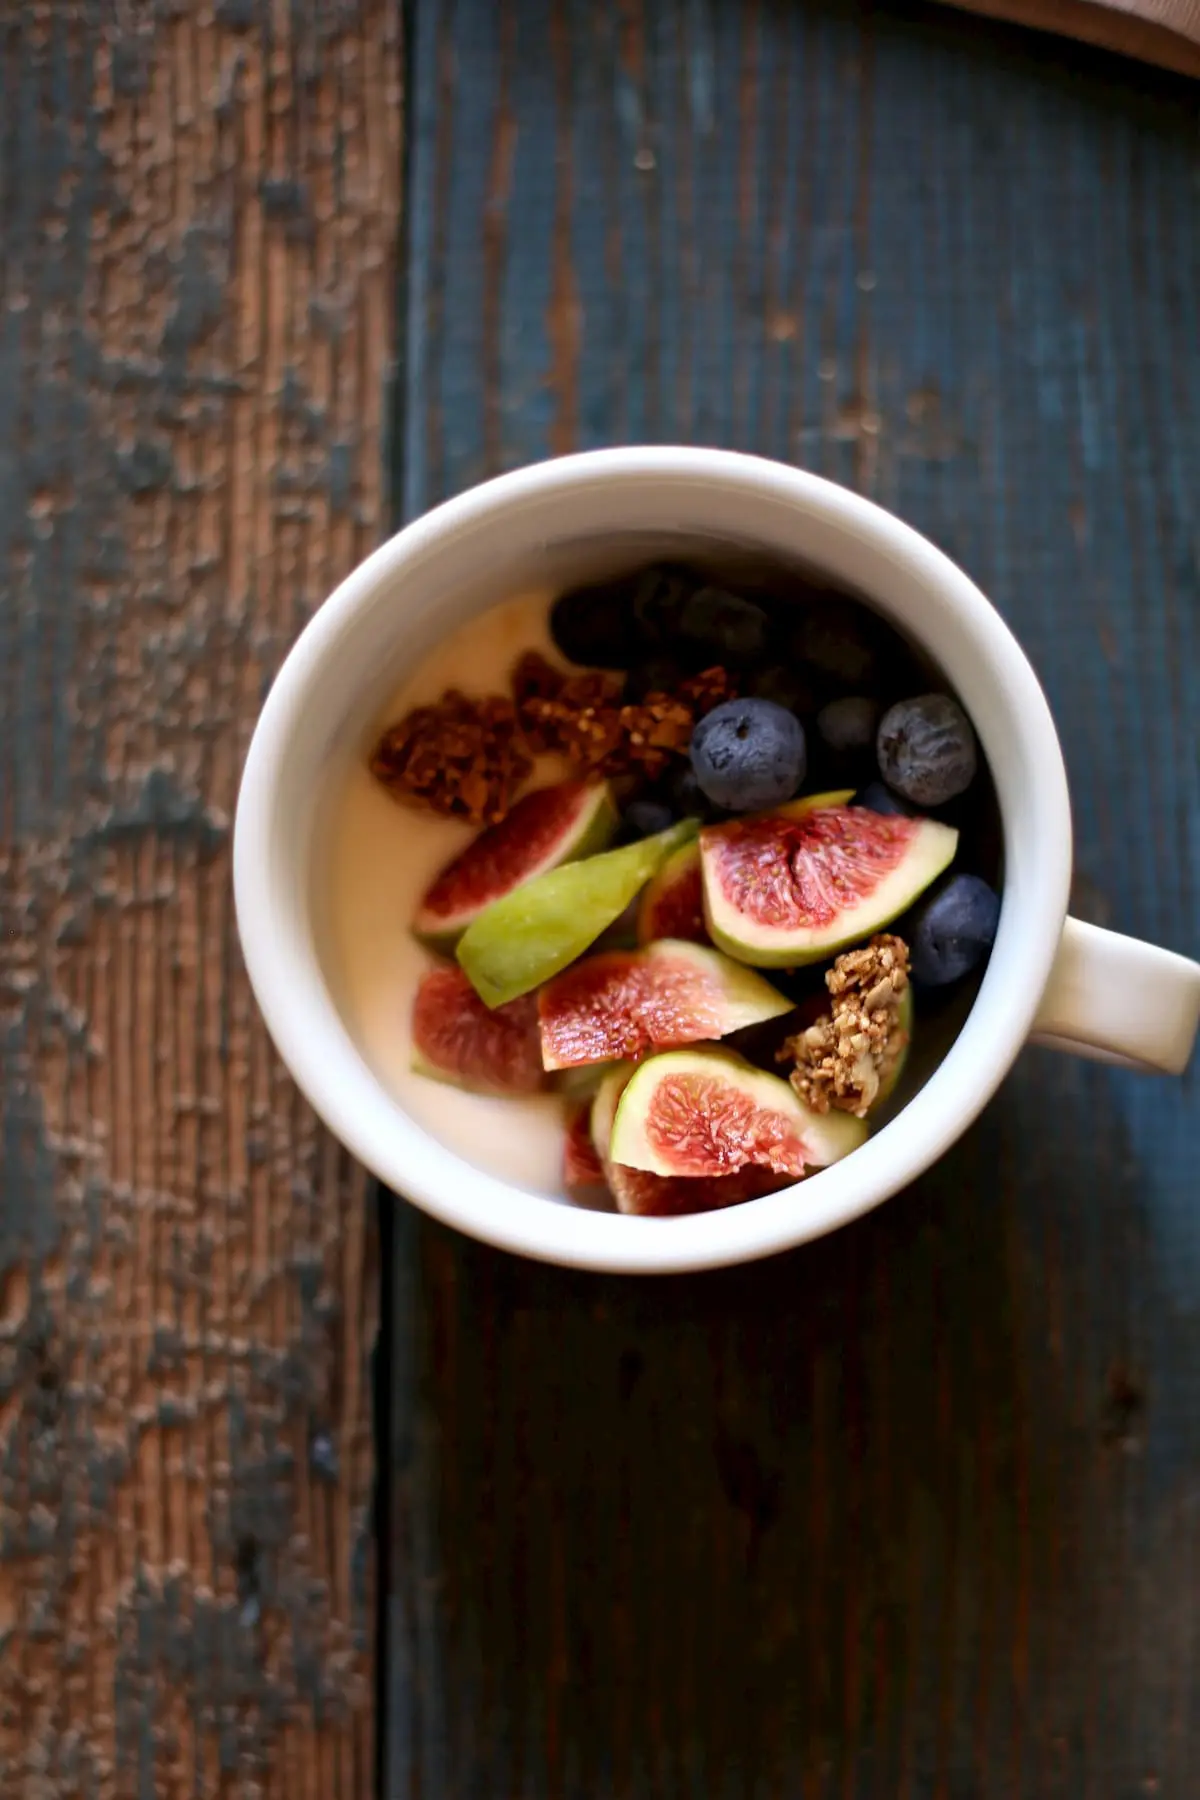 One bowl of yogurt and fresh figs on a wooden table